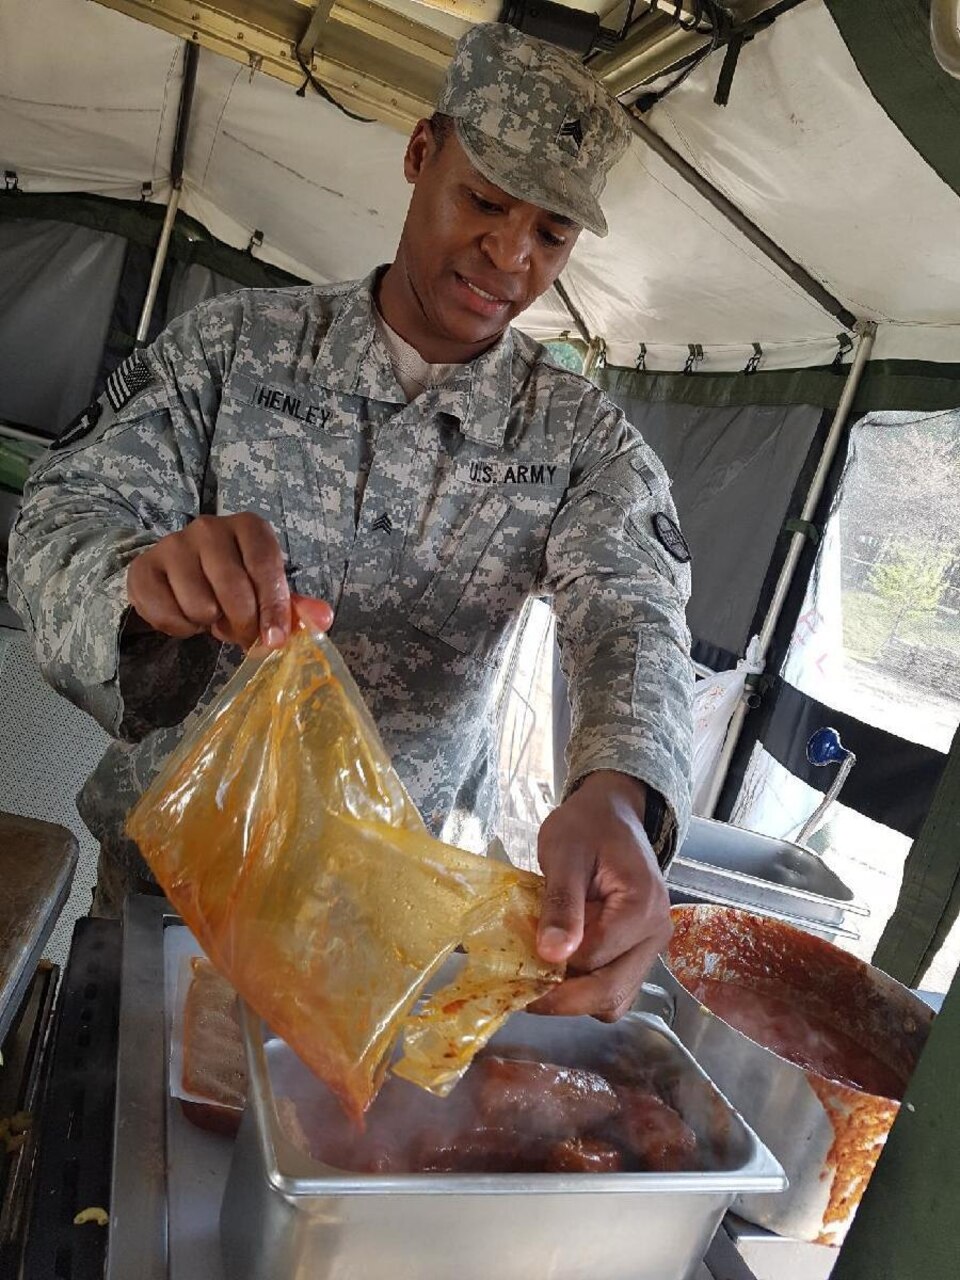 North Carolina Army National Guard Sgt. Daledrick Henley prepares dinner in a mobile kitchen trailer near the dining facility at the 1st Republic of Korea Marine camp during Operation Pacific Reach Exercise 17 in Pohang, South Korea, April 14, 2017. Army photo by Sgt. Uriah Walker